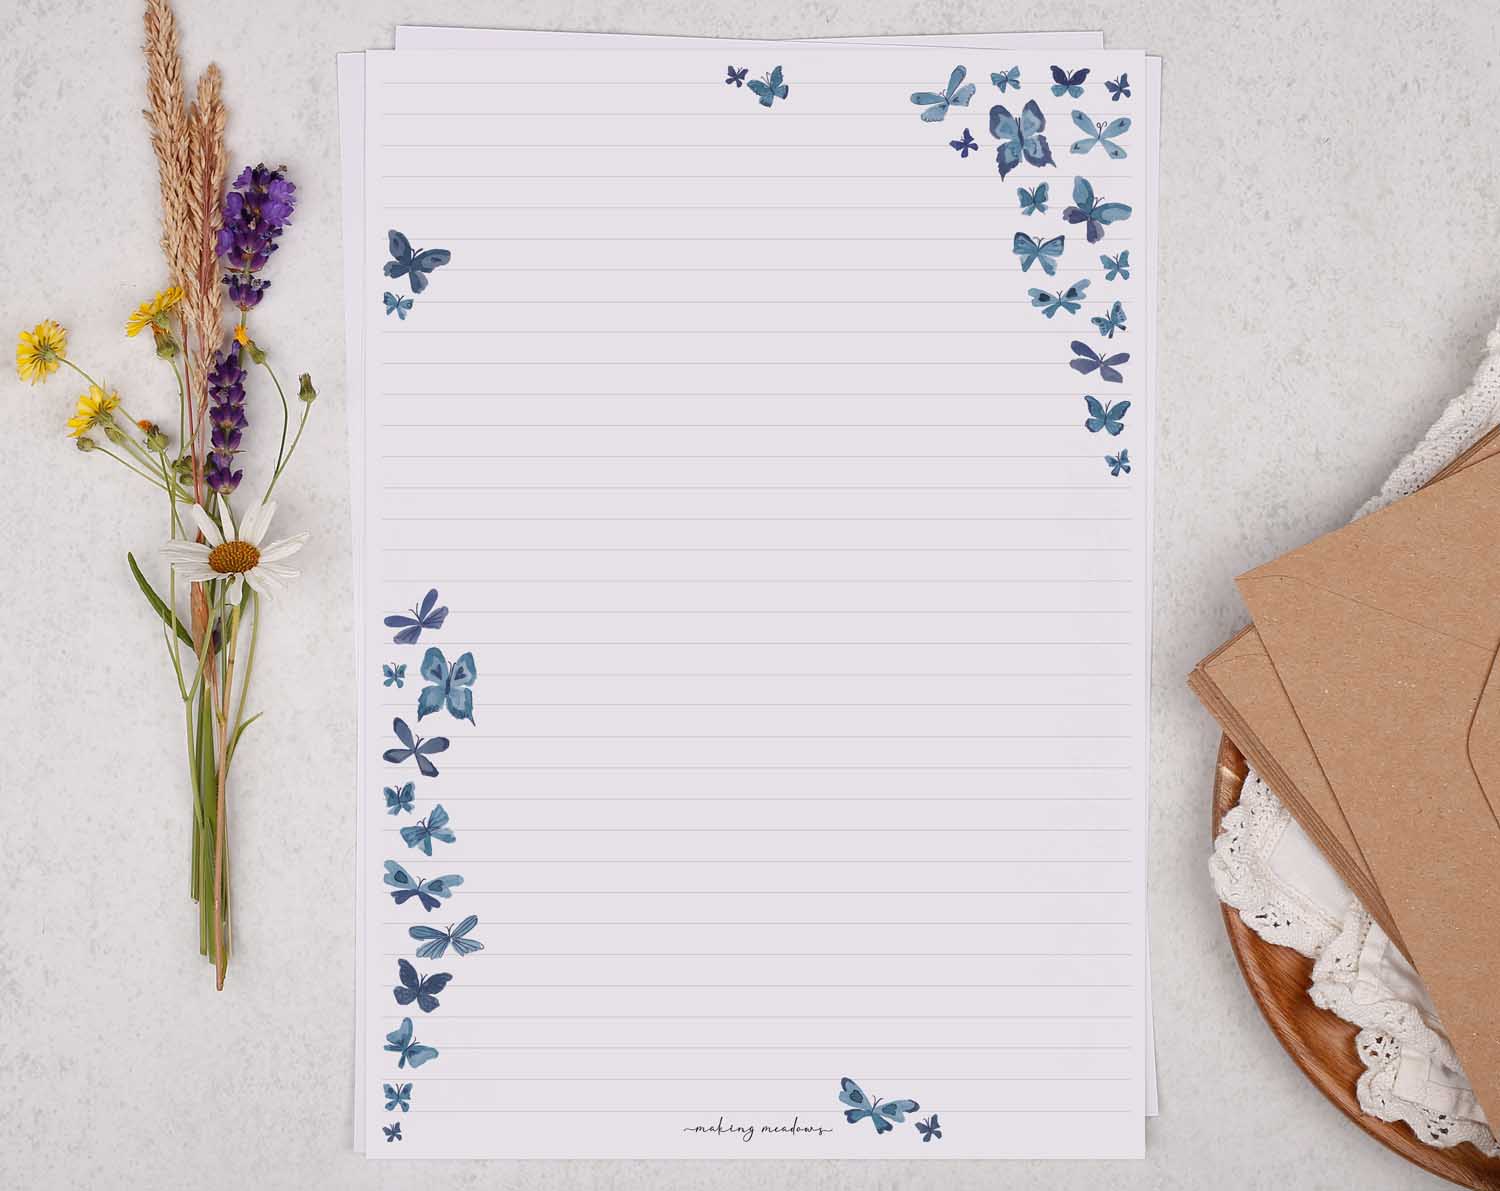 A4 letter writing paper sheets with blue cascading butterflies fluttering around the paper in a delicate pattern.